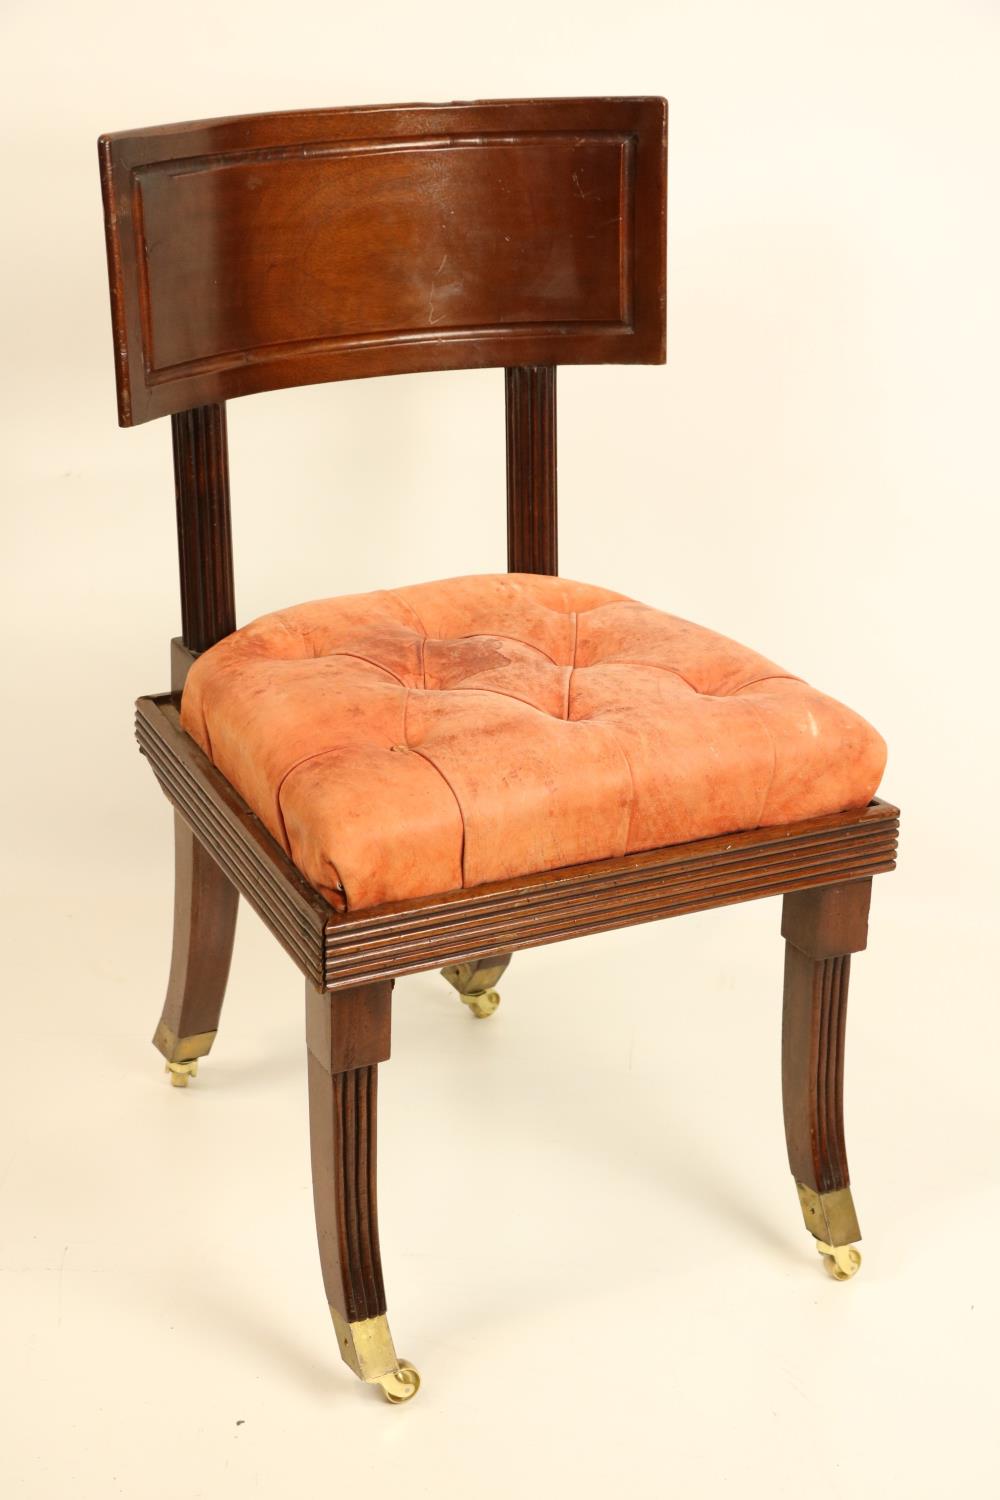 A late Regency period mahogany "Klismos" Side Chair, probably Irish, with deep curved panel back